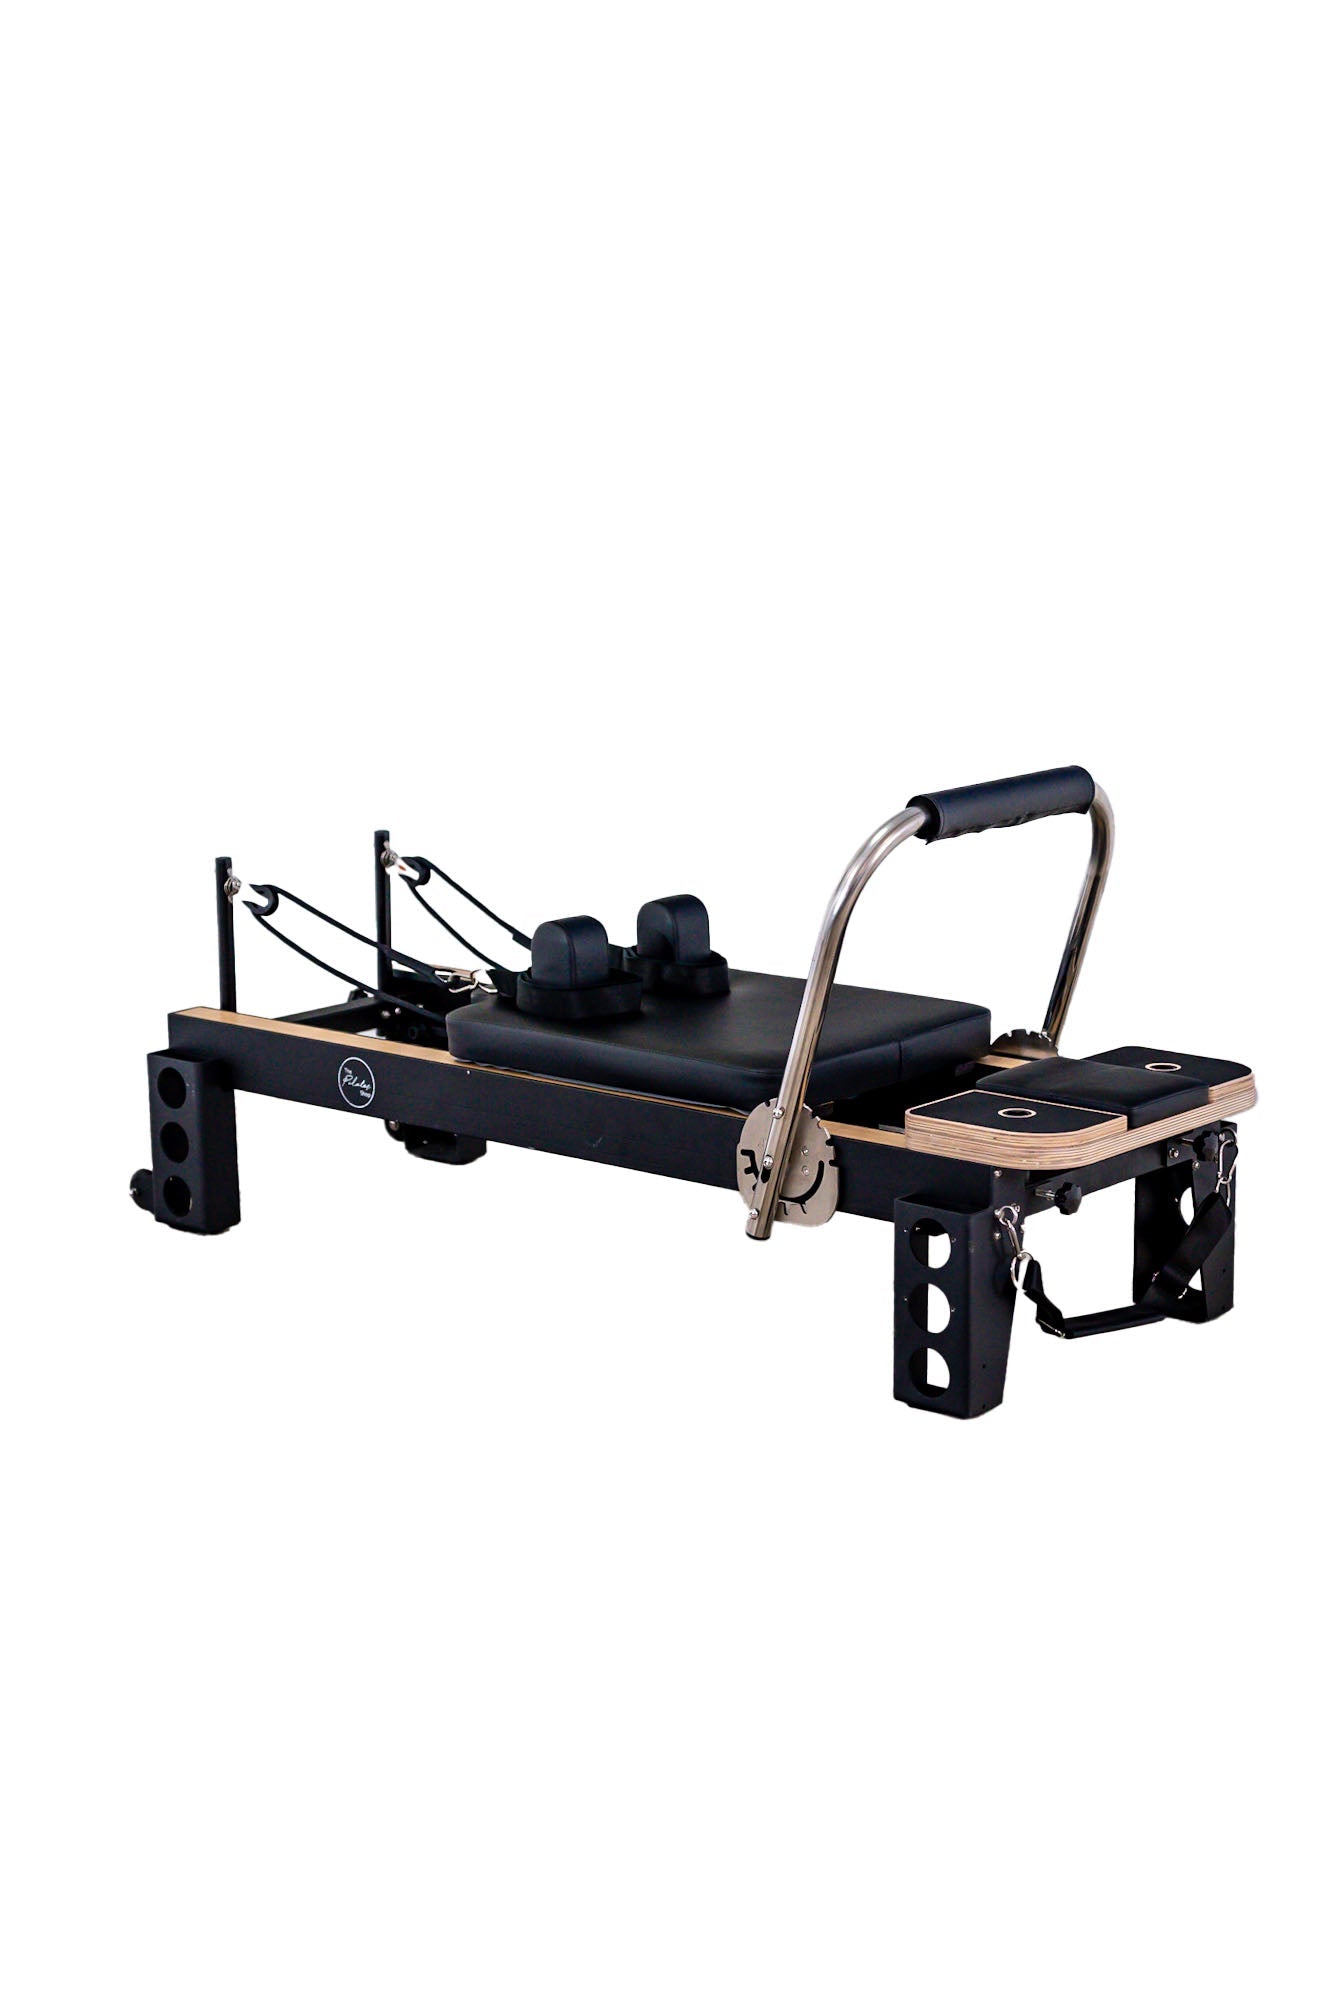 Ziva Children's Reformer Small Hire-to-Buy - The Pilates Shop